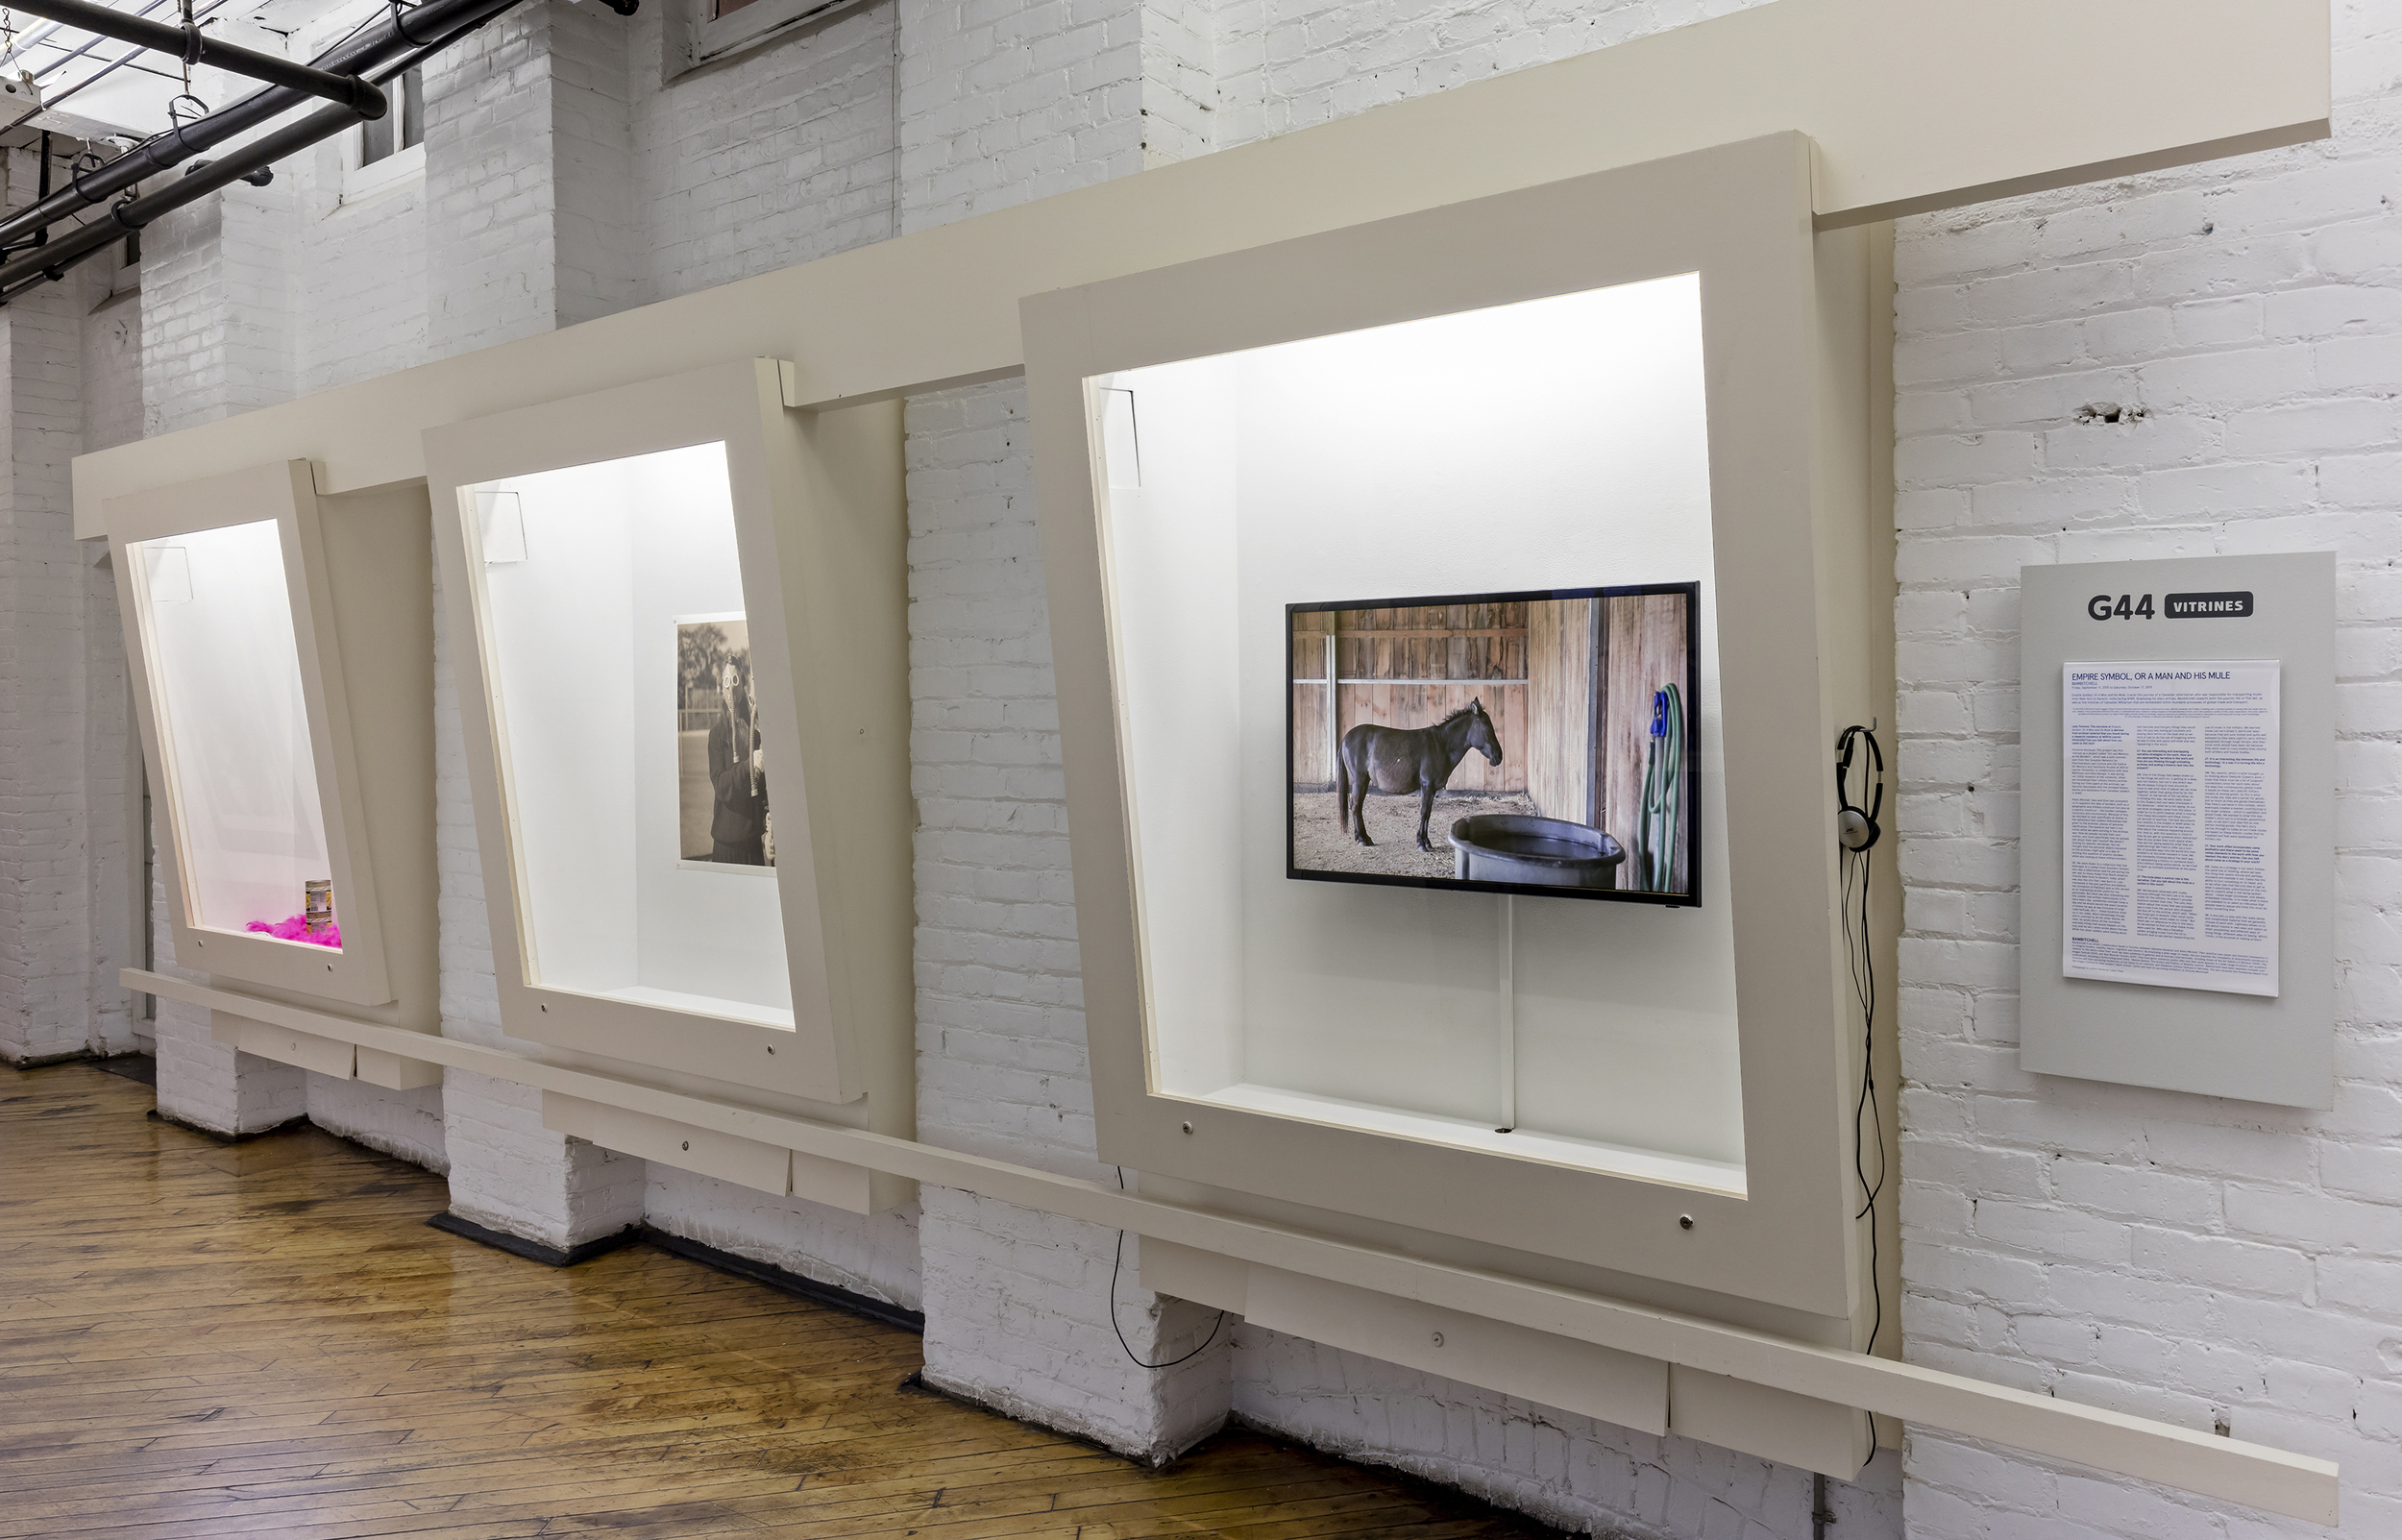 Installation view at Gallery44